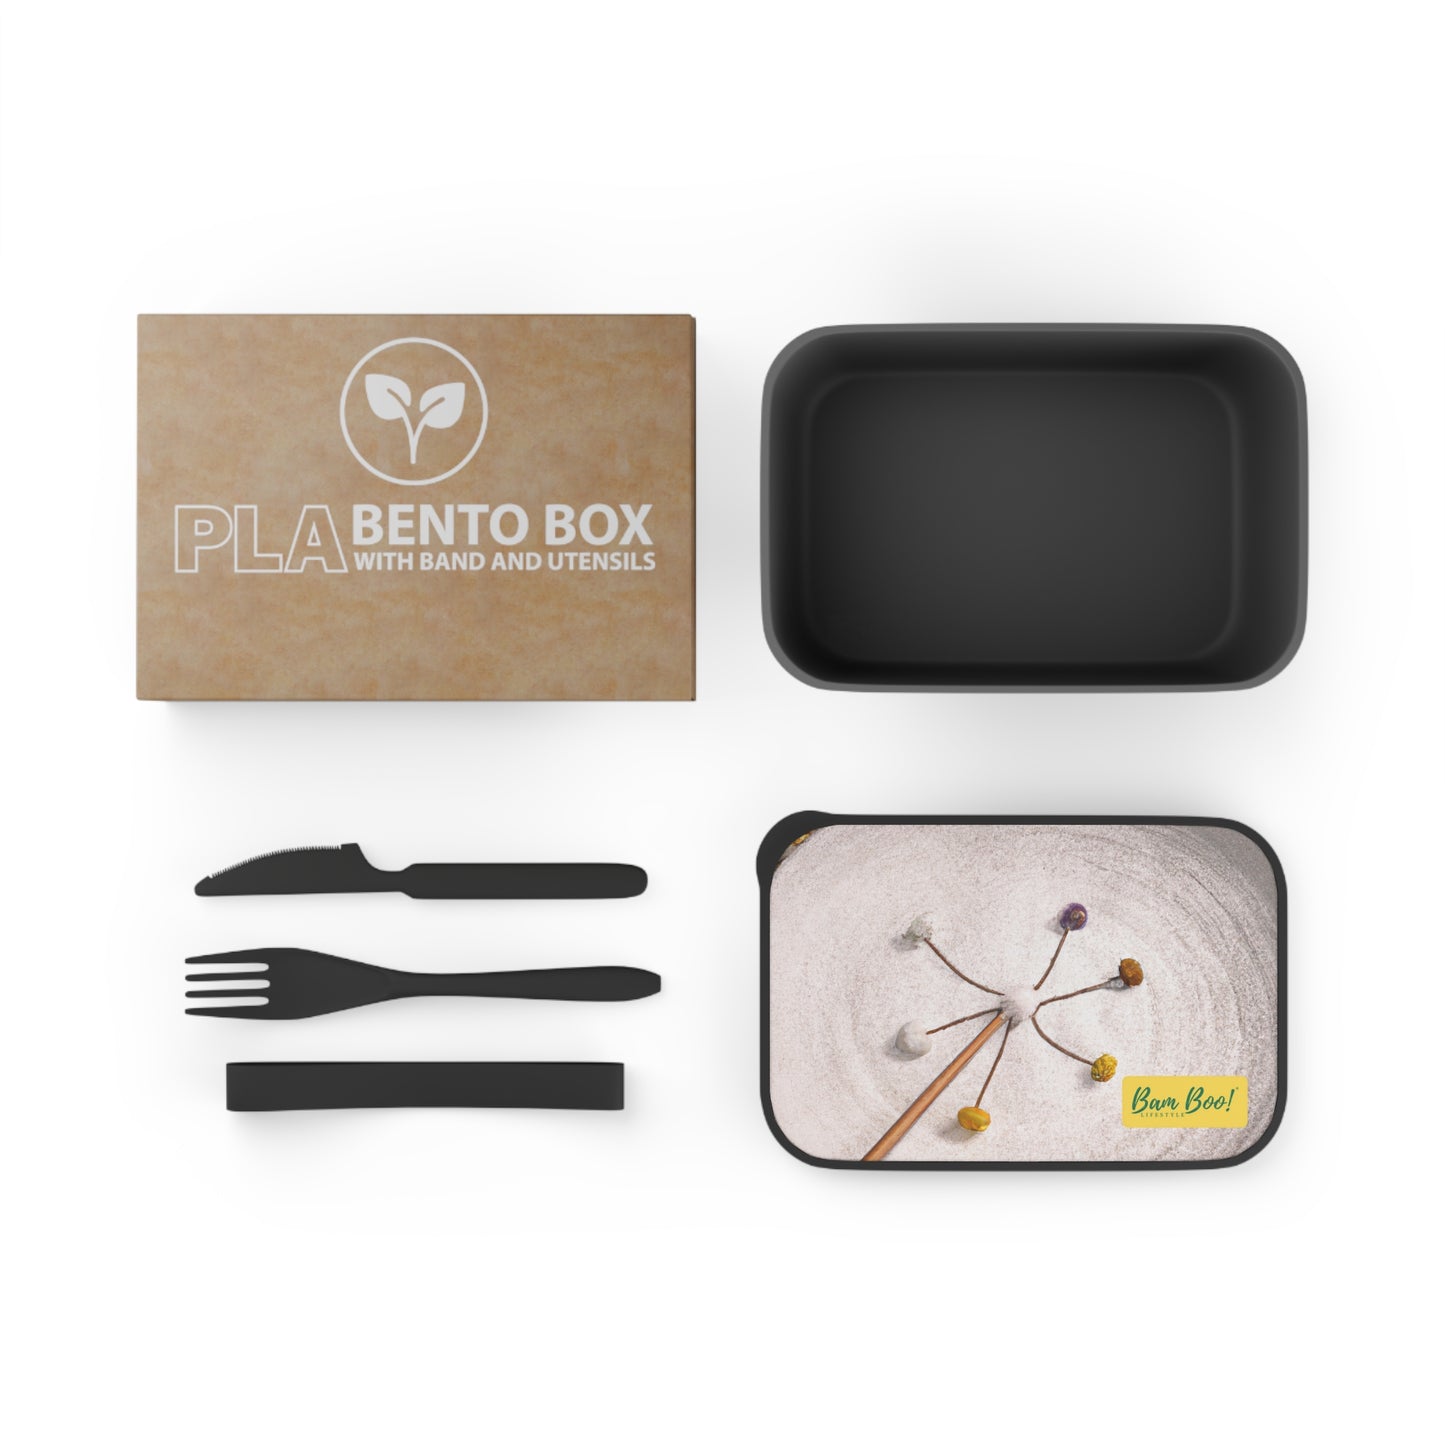 "Nature's Intertwined Form: Exploring the Beauty of Earth Through Photography and Painting" - Bam Boo! Lifestyle Eco-friendly PLA Bento Box with Band and Utensils